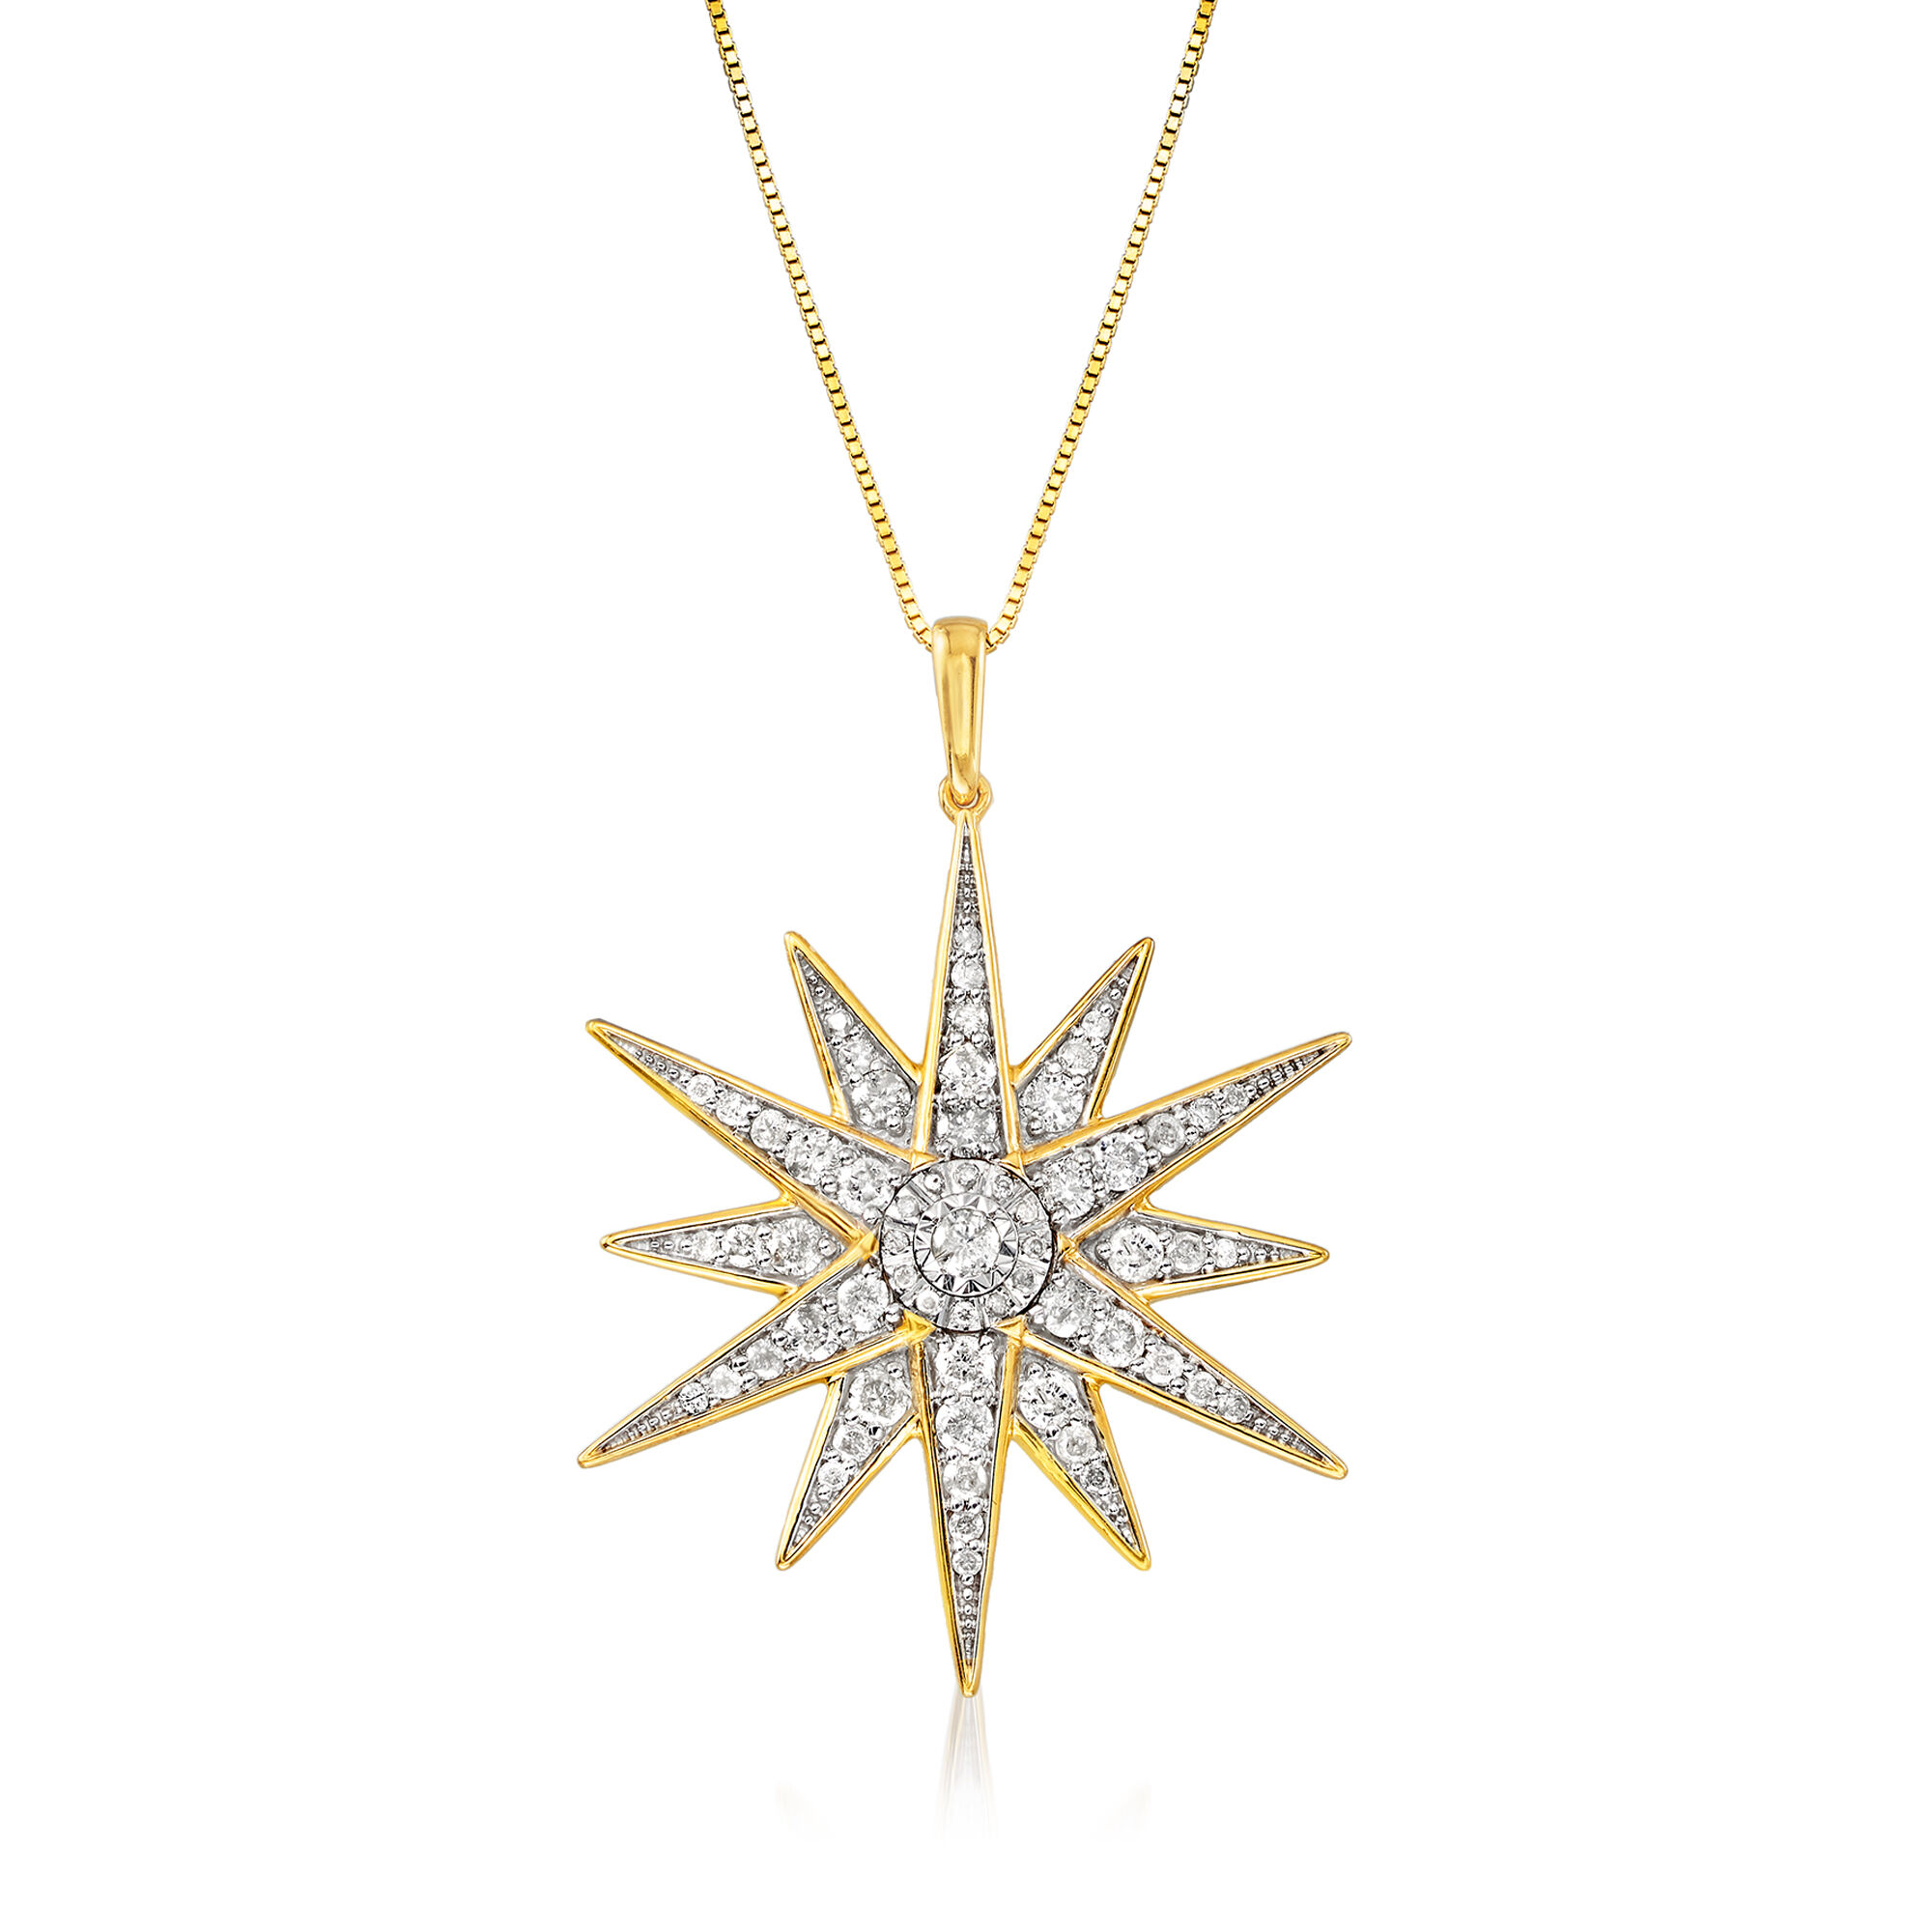 1.20 ct. t.w. Diamond Starburst Pendant Necklace in 18kt Gold Over